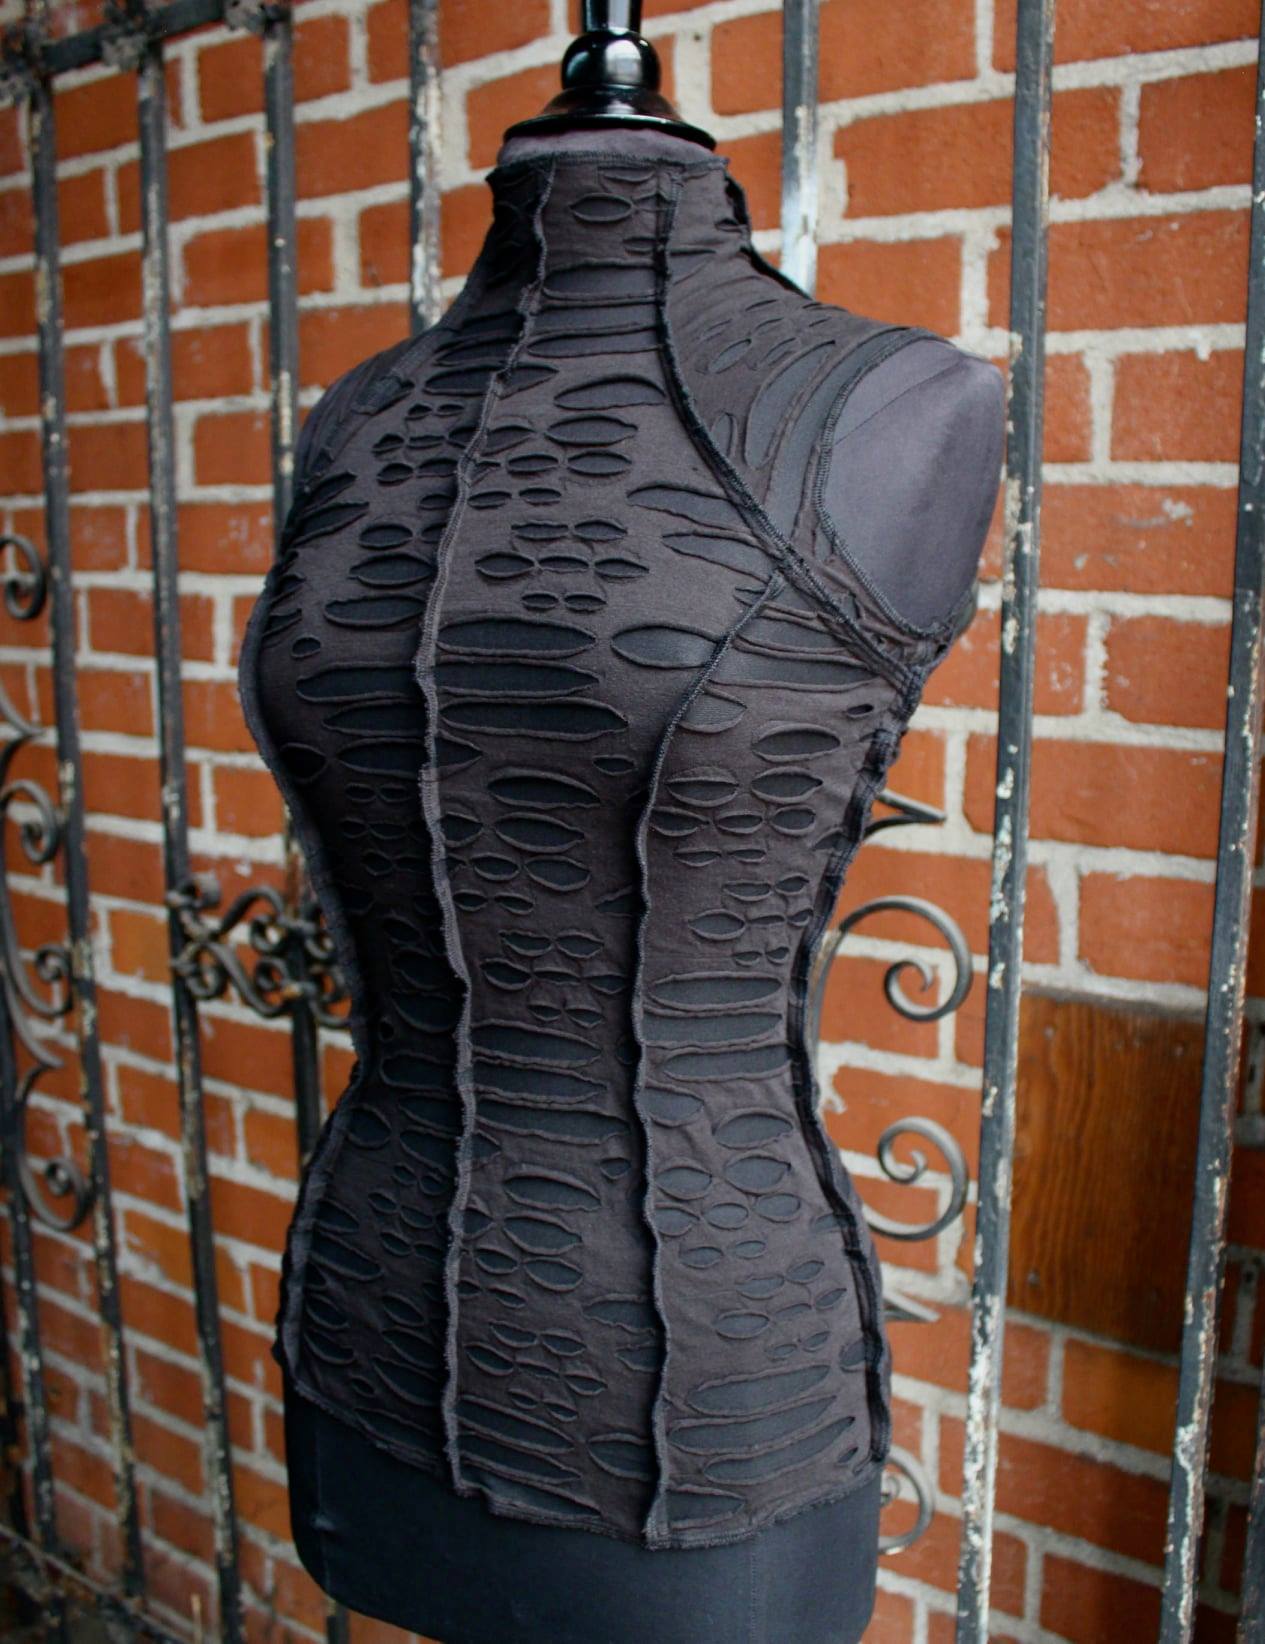 WASTELAND TOP - Black Decayed Fabric